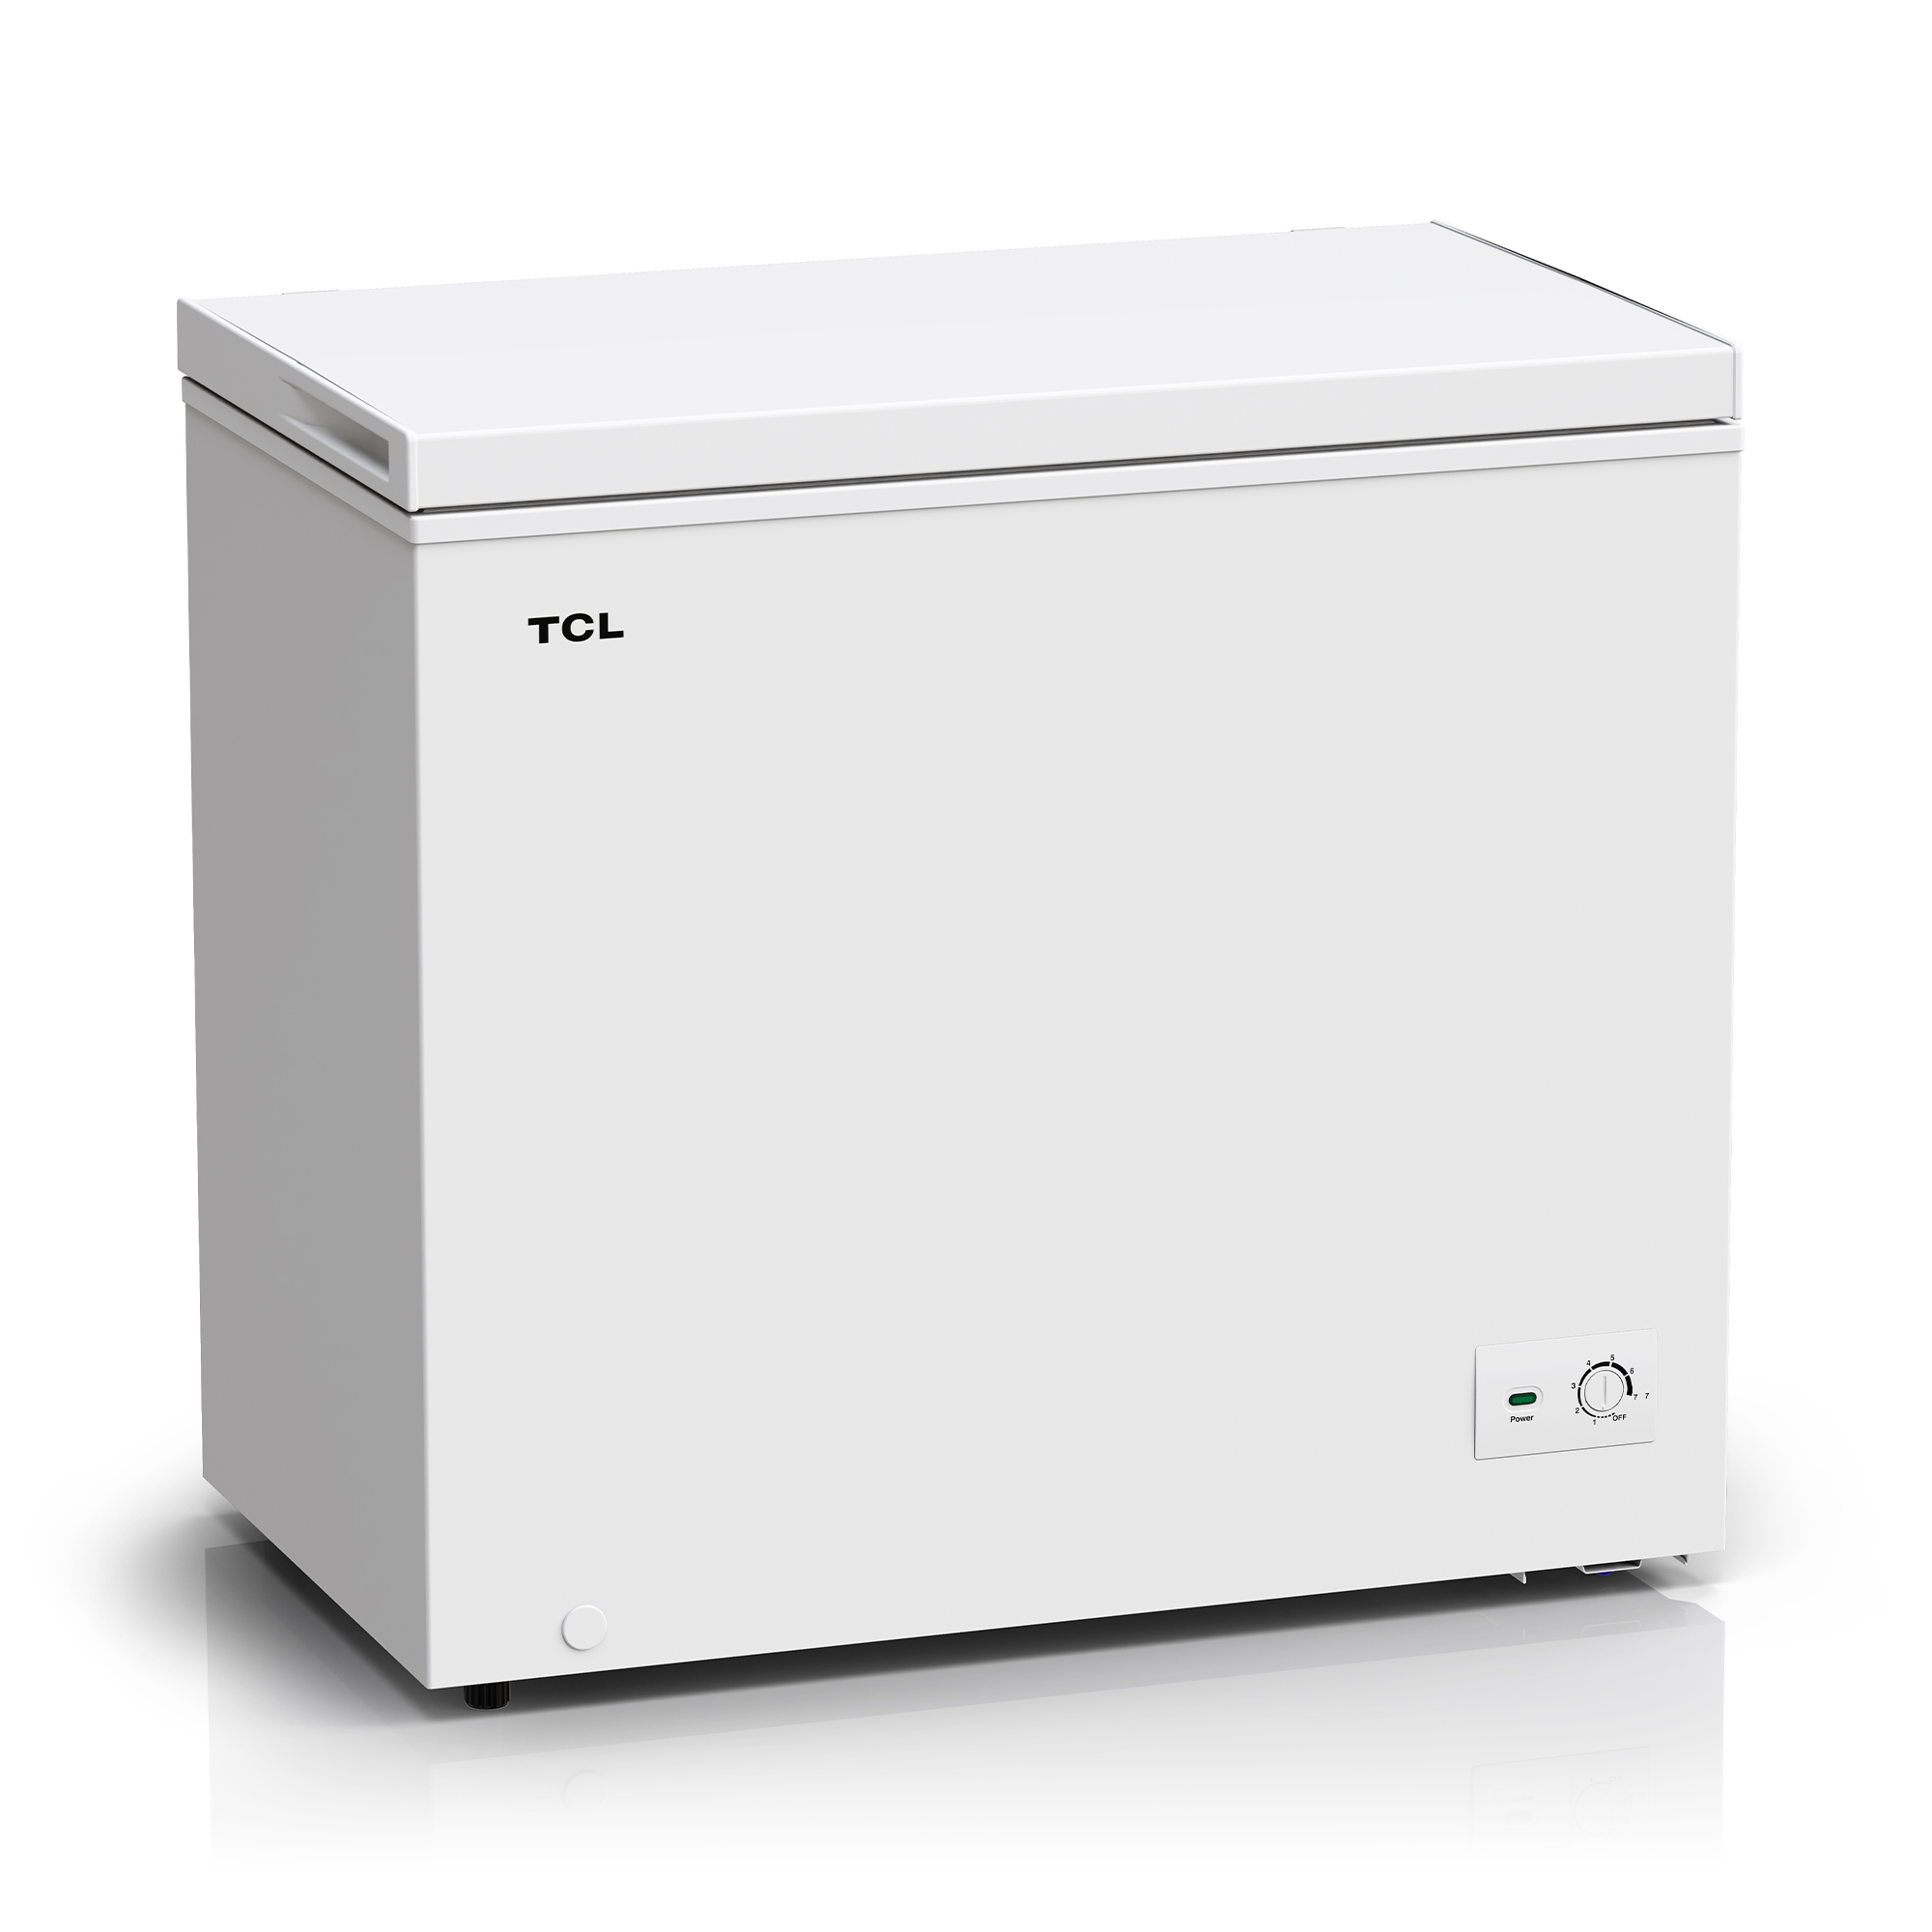 TCL 7.0 Cu. Ft. Chest Freezer, White, Garage Ready, CF073W - image 1 of 10